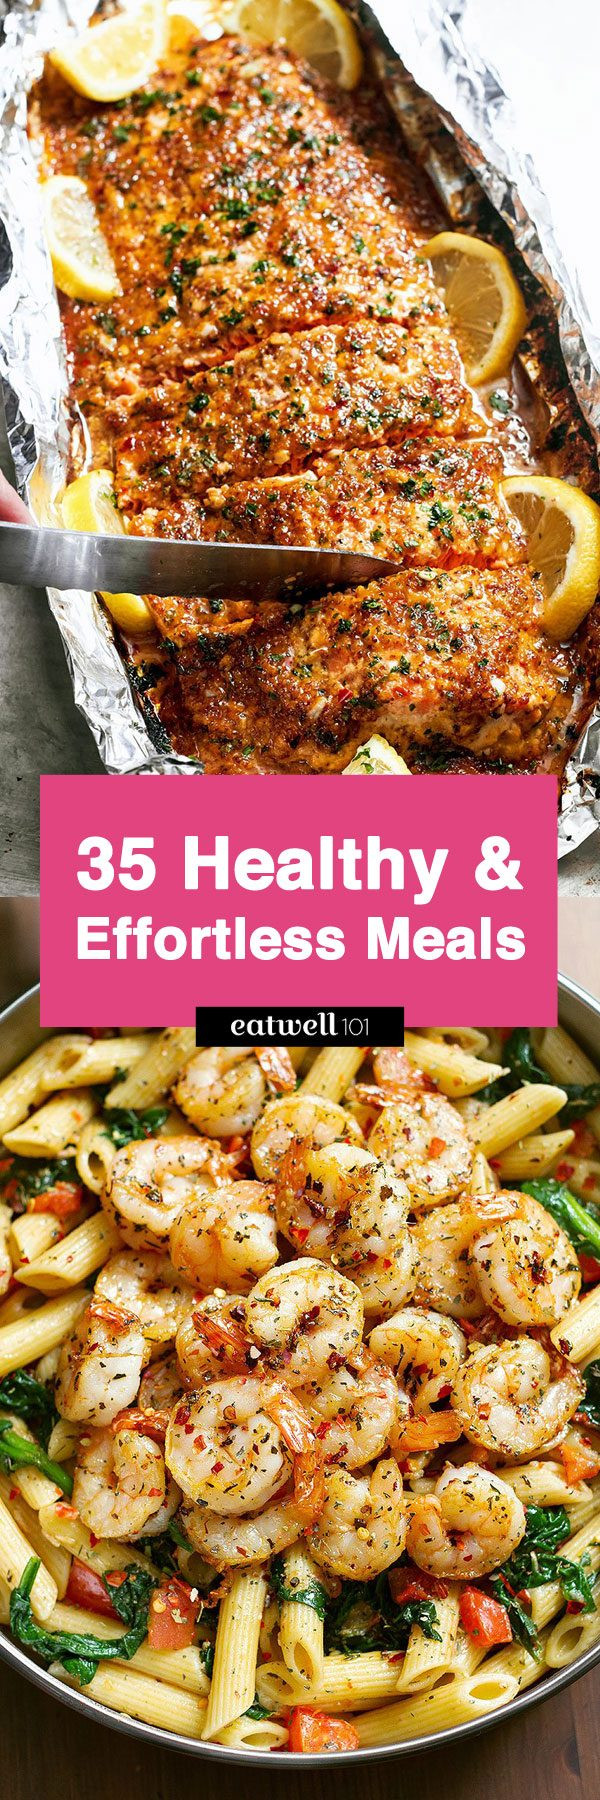 Healthy Easy Dinner Ideas
 43 Low Effort and Healthy Dinner Recipes — Eatwell101